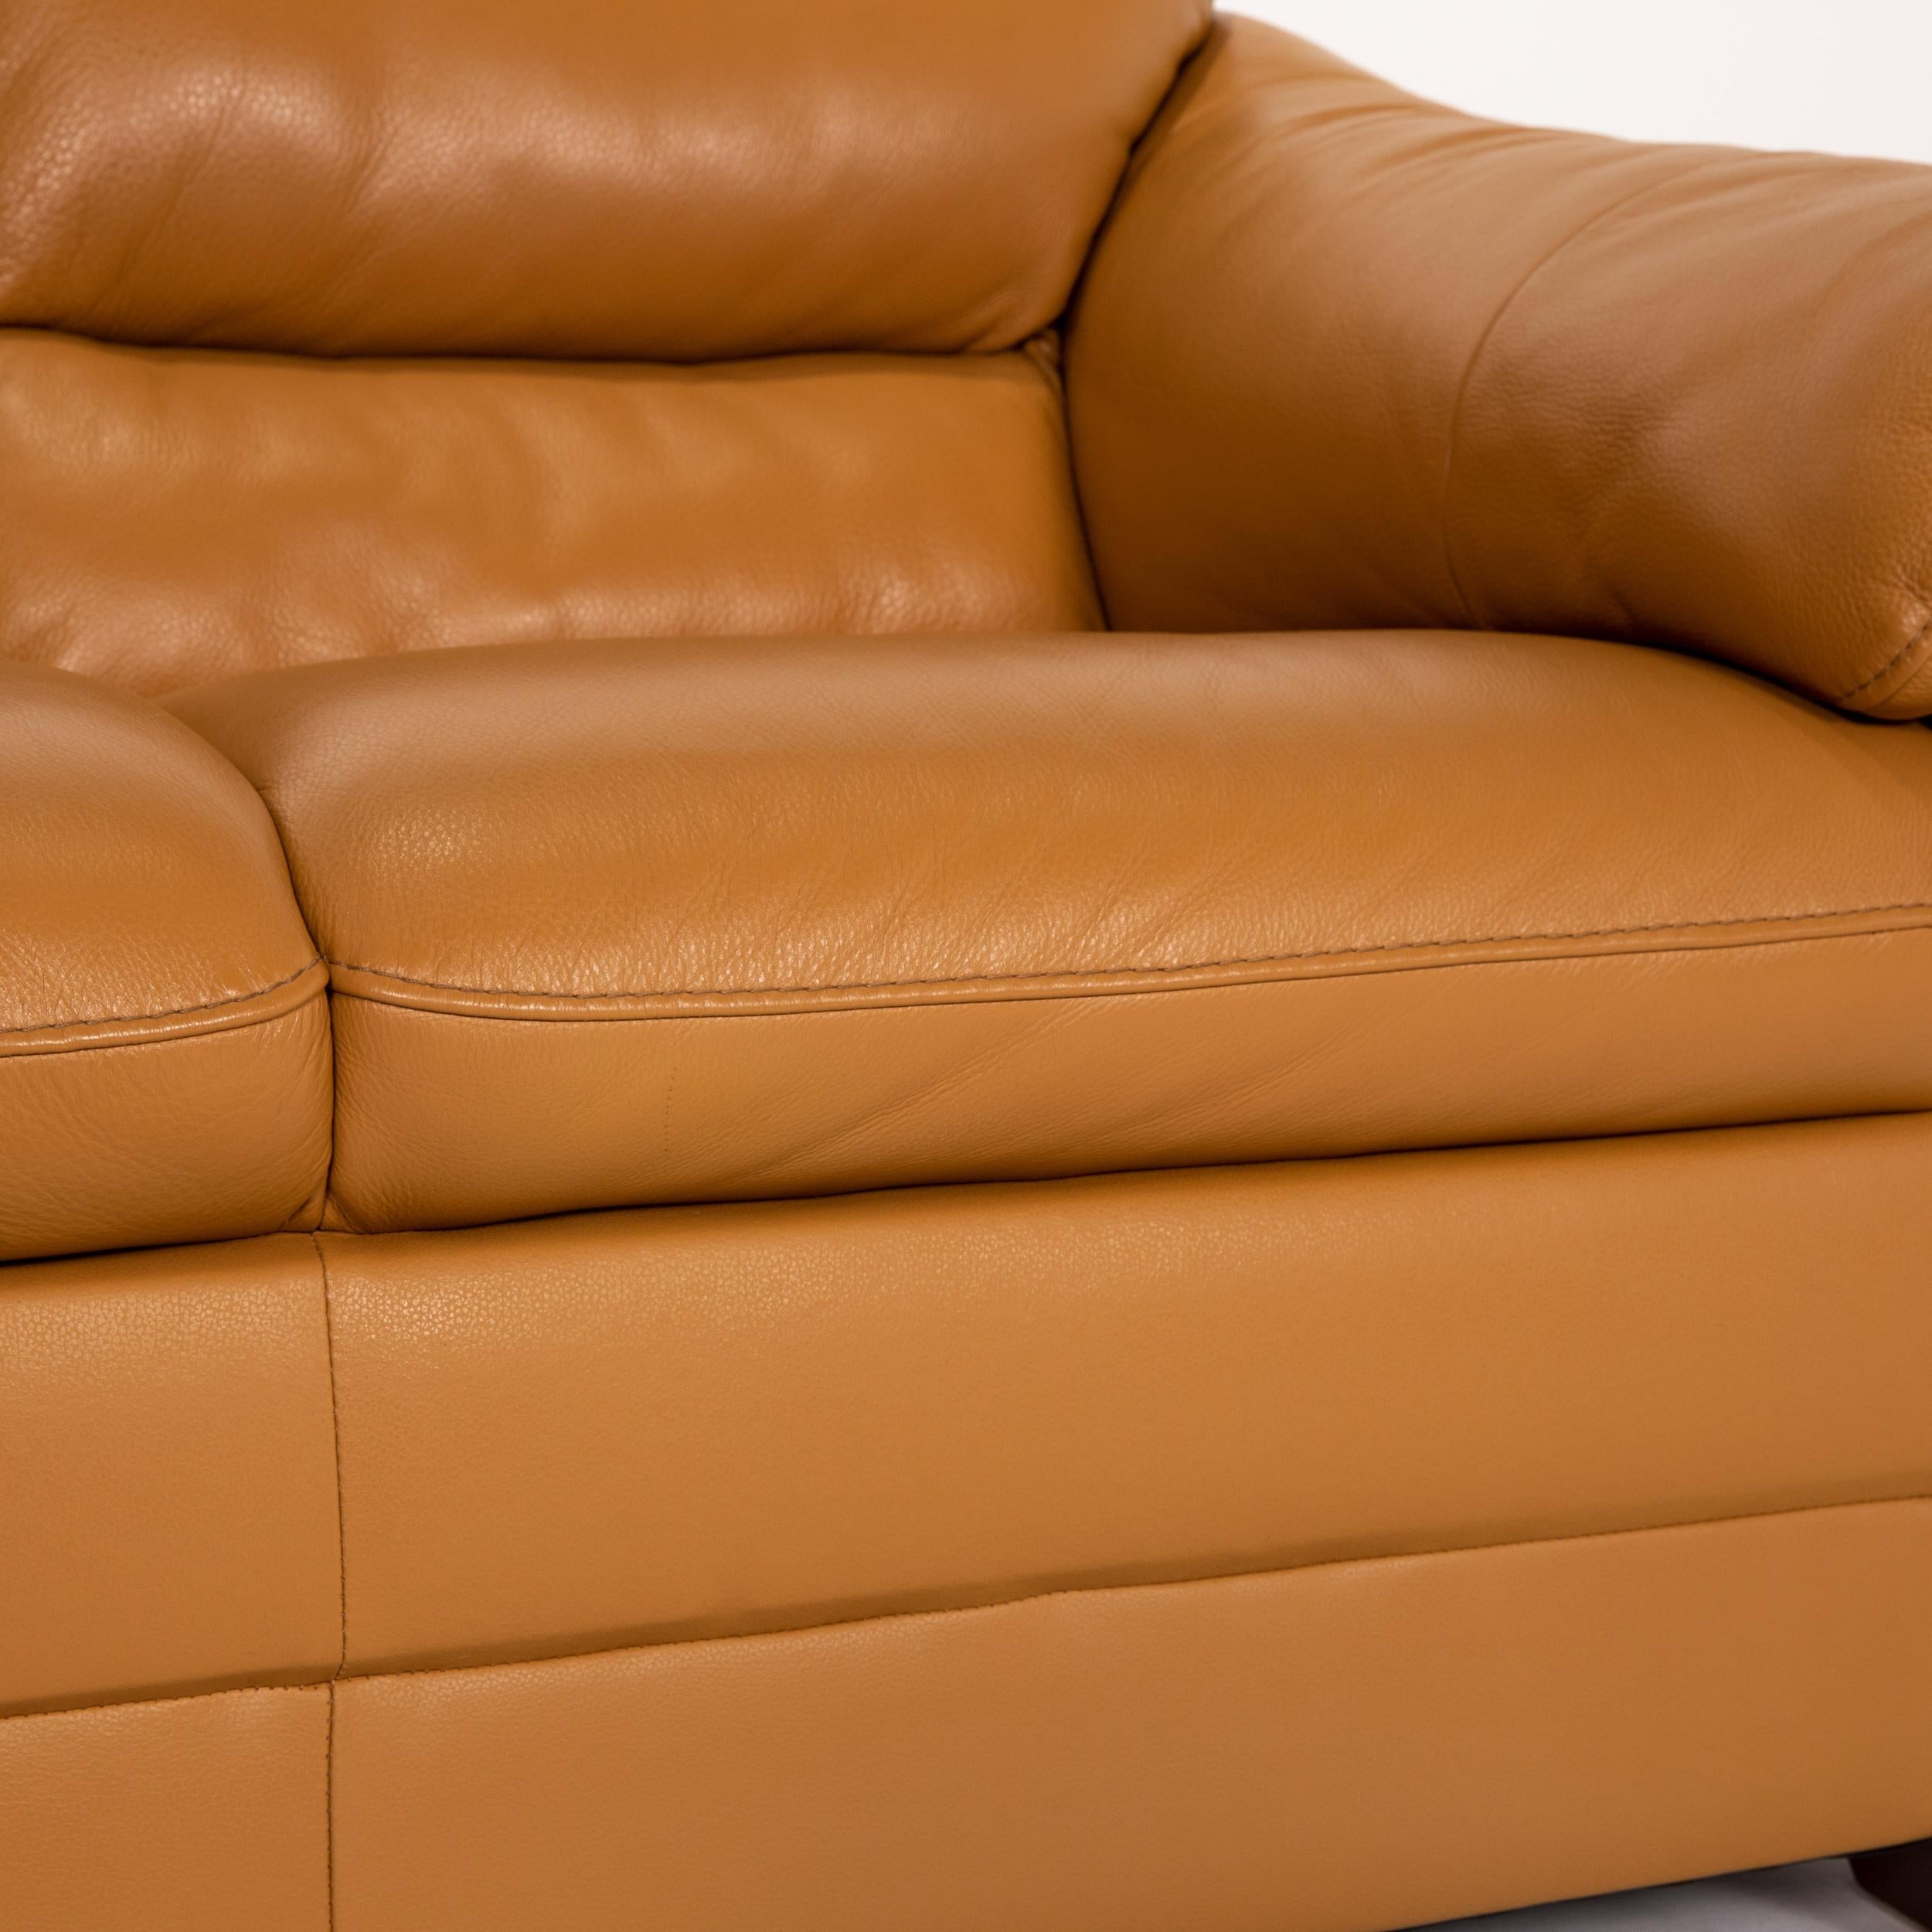 mustard yellow leather couch